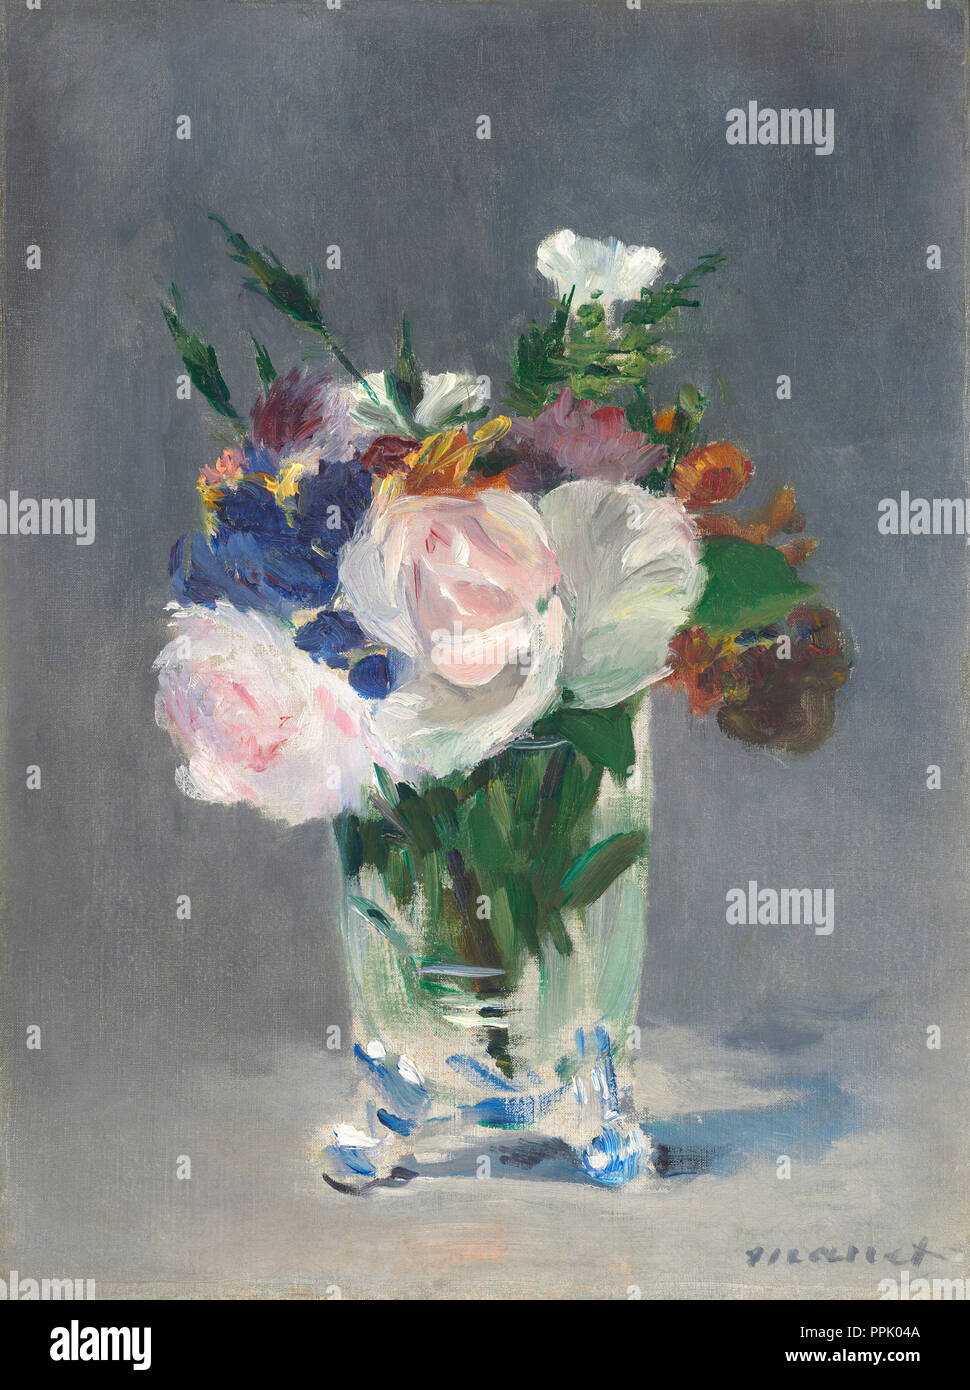 Flowers in a Crystal Vase. Dated: c. 1882. Dimensions: overall: 32.7 x 24.5 cm (12 7/8 x 9 5/8 in.)  framed: 52.7 x 44.8 x 8.3 cm (20 3/4 x 17 5/8 x 3 1/4 in.). Medium: oil on canvas. Museum: National Gallery of Art, Washington DC. Author: EDOUARD MANET. Stock Photo